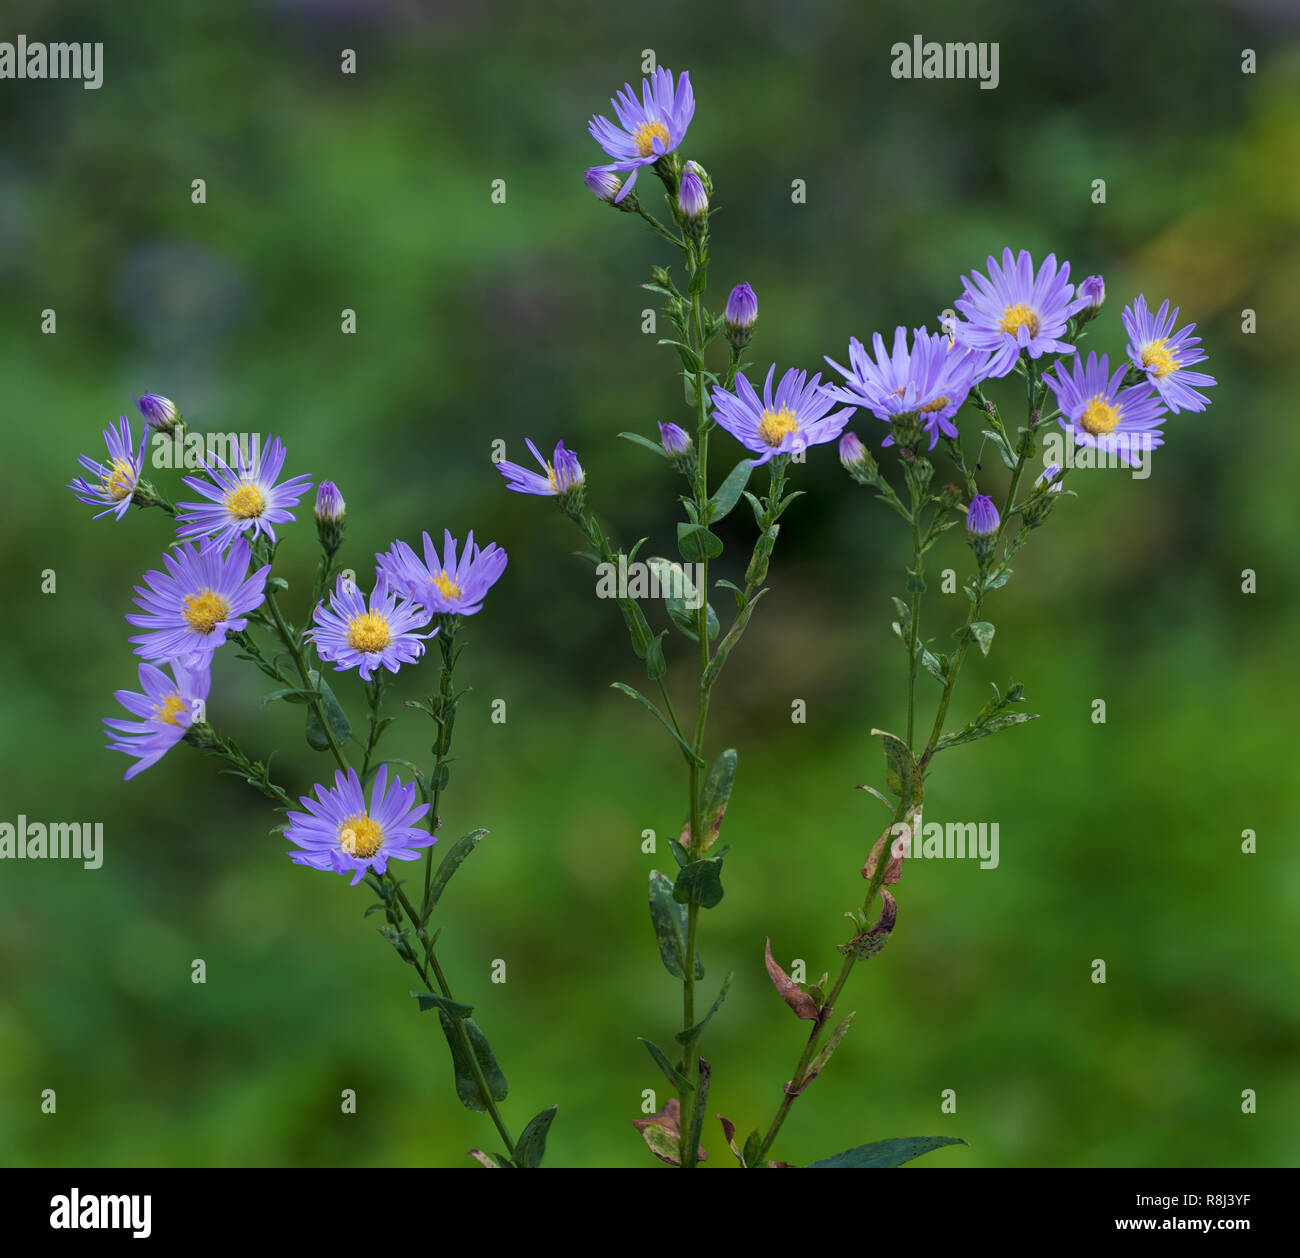 Smooth blue aster flowers (Aster laevis), a native wildflower of the North American prairies. Stock Photo